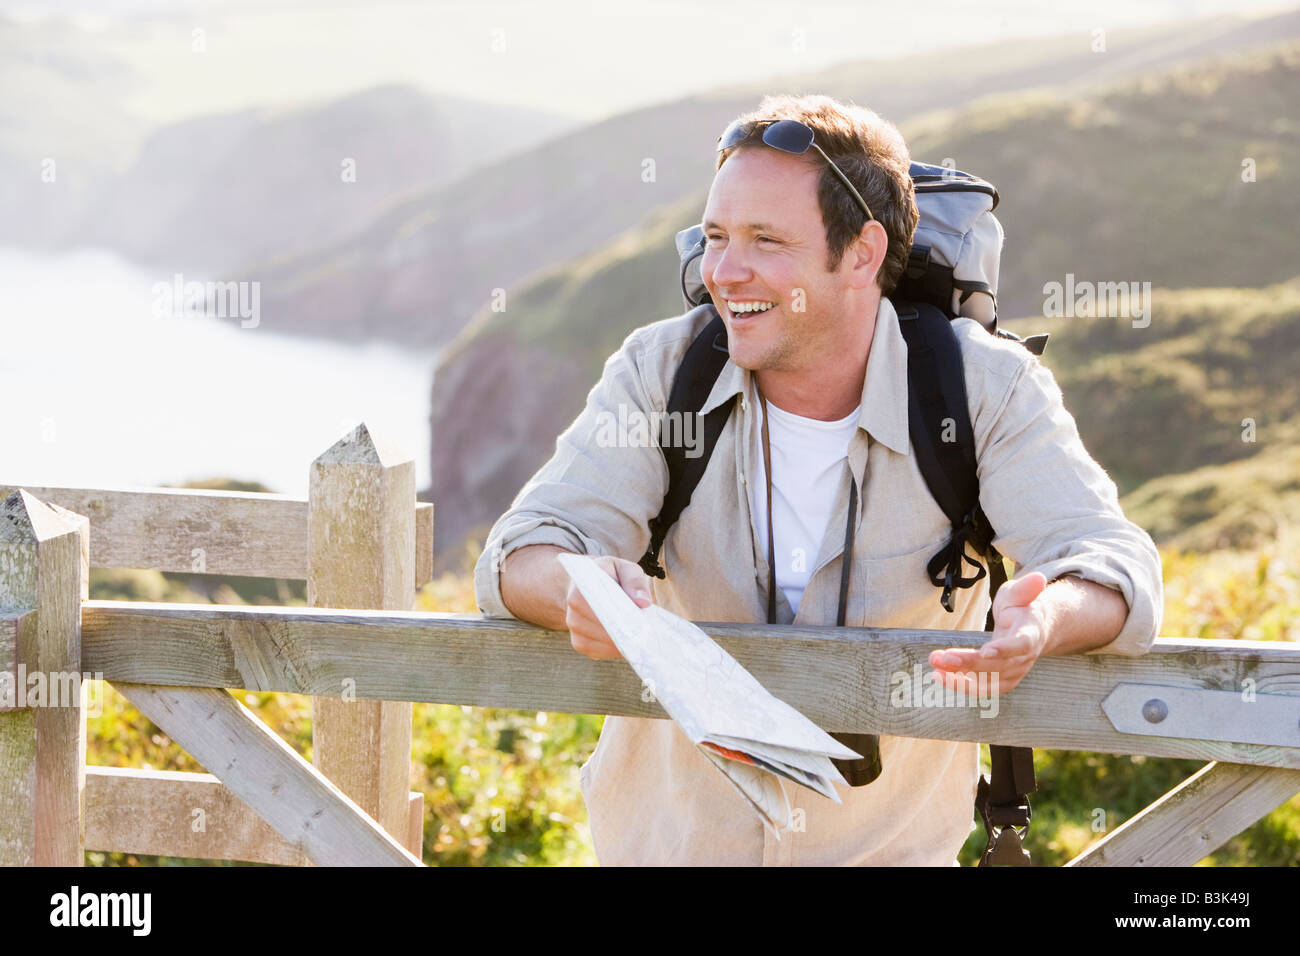 Man relaxing on cliffside path holding map and laughing Stock Photo